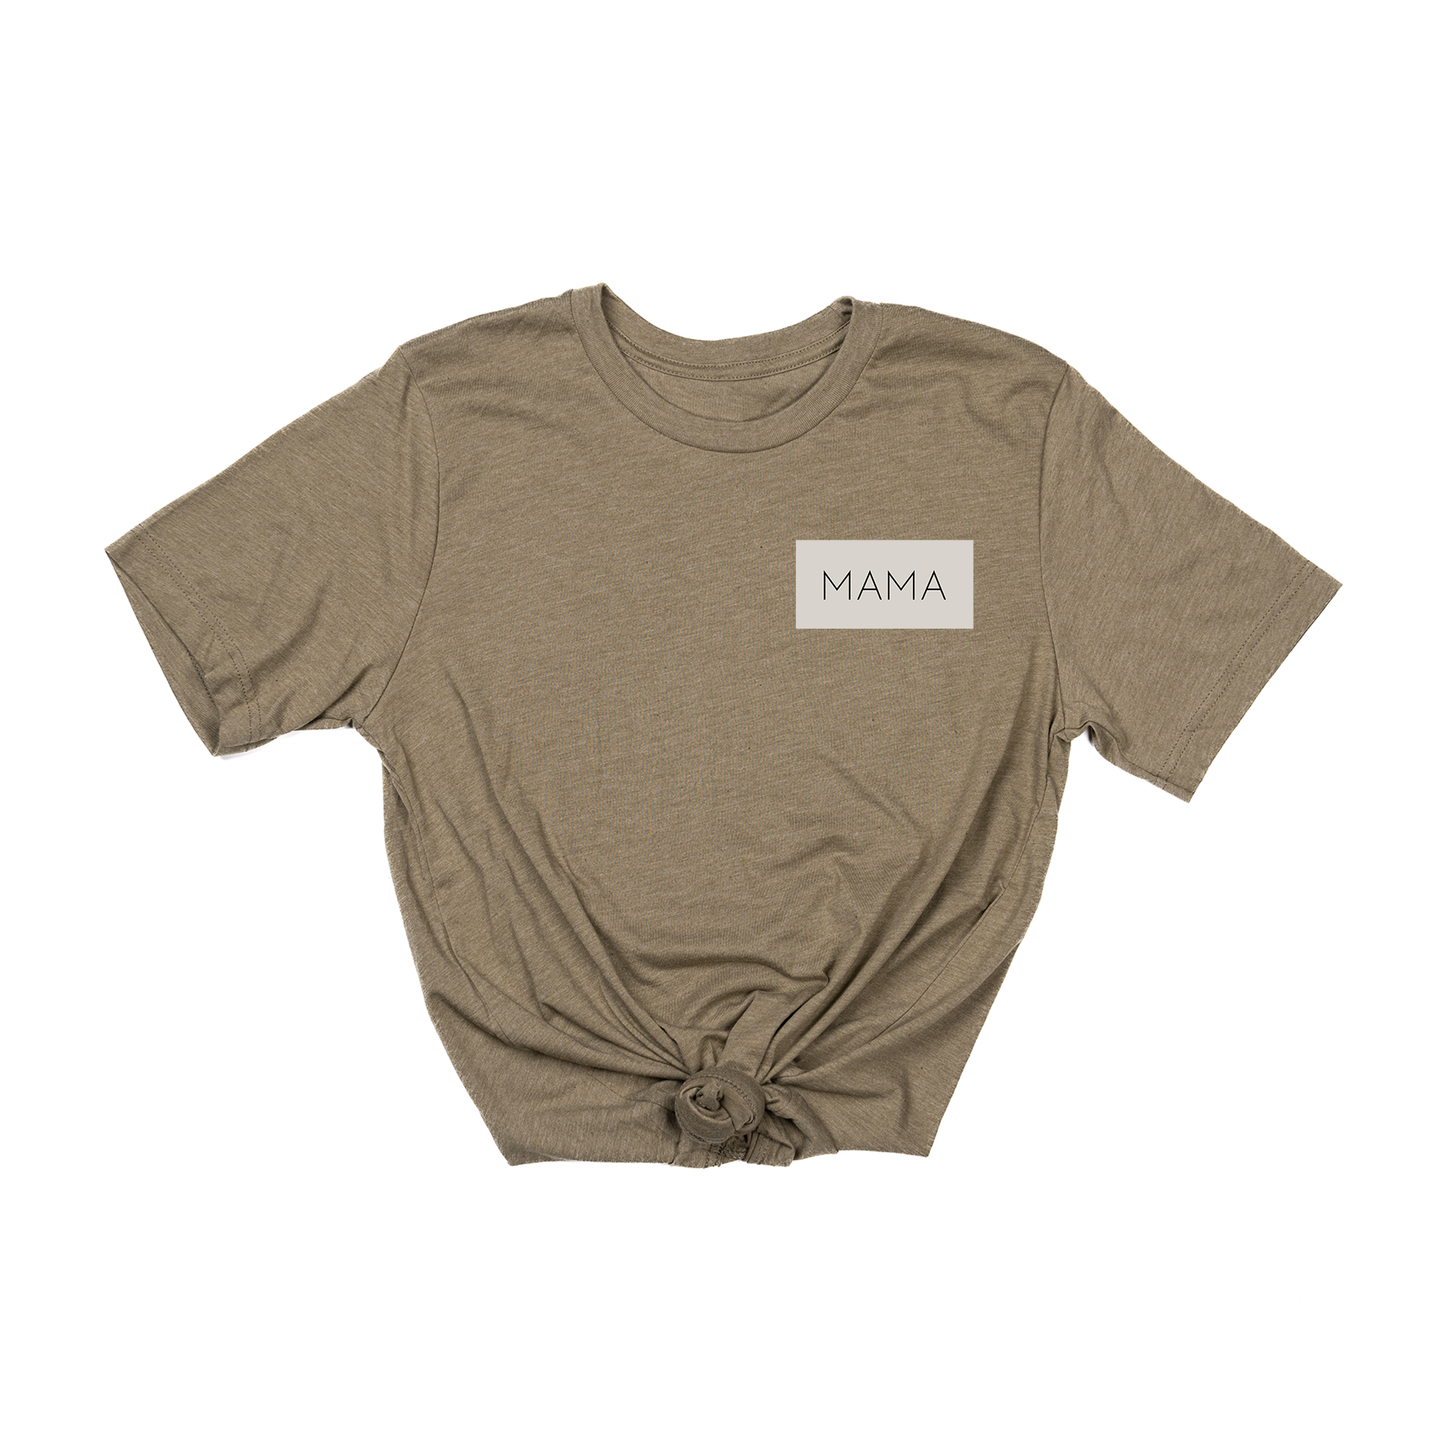 Mama (Boxed Collection, Pocket, Stone Box/Black Text) - Tee (Olive)